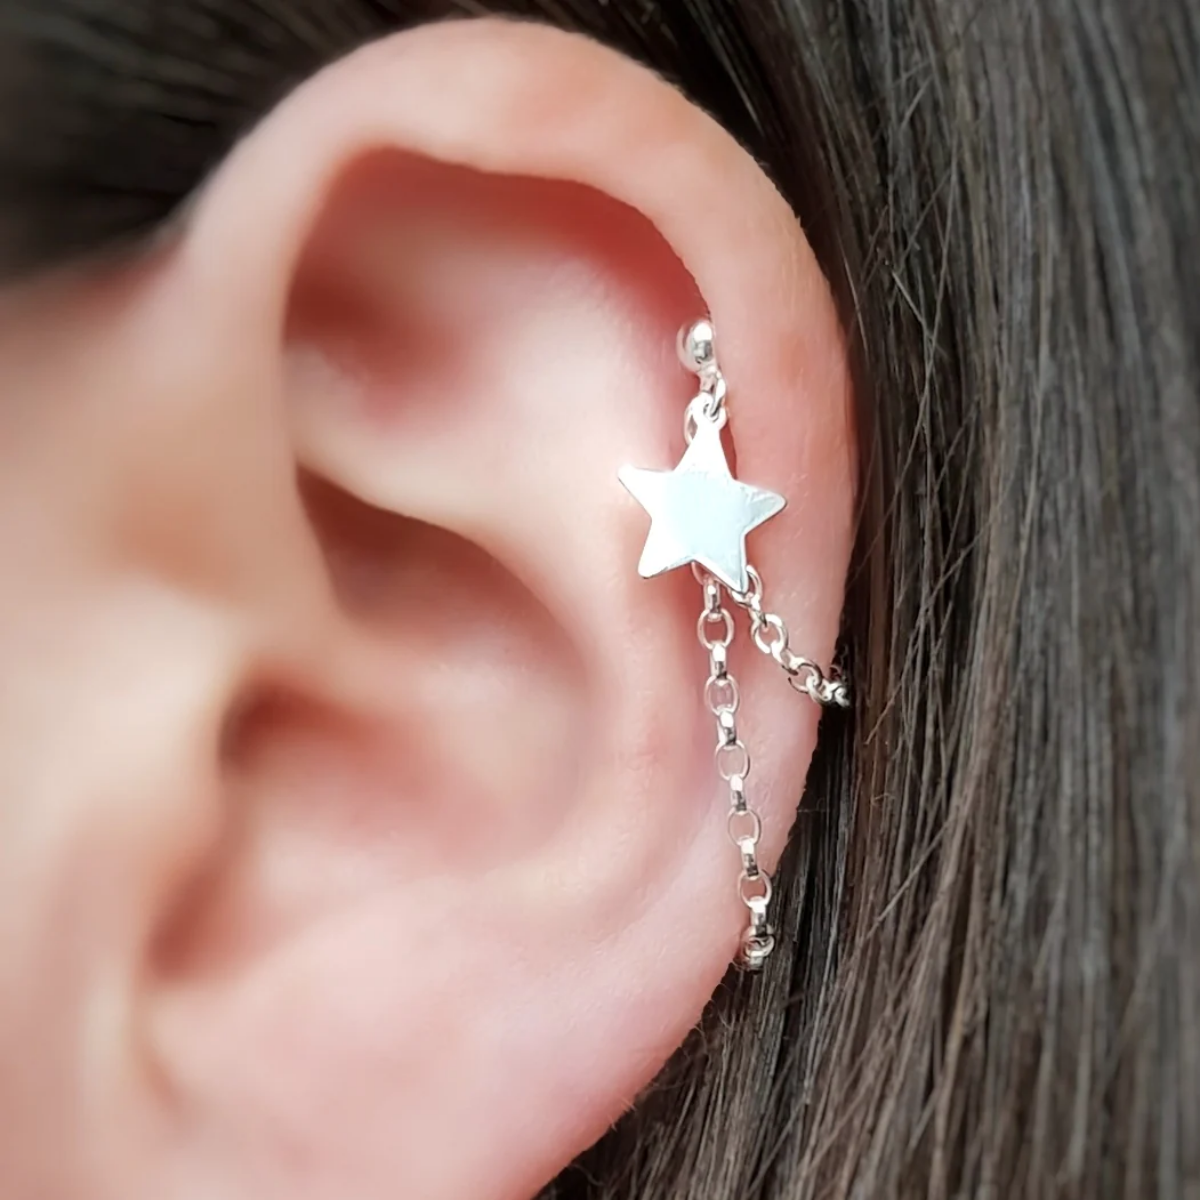 helix piercing dangling chain with star